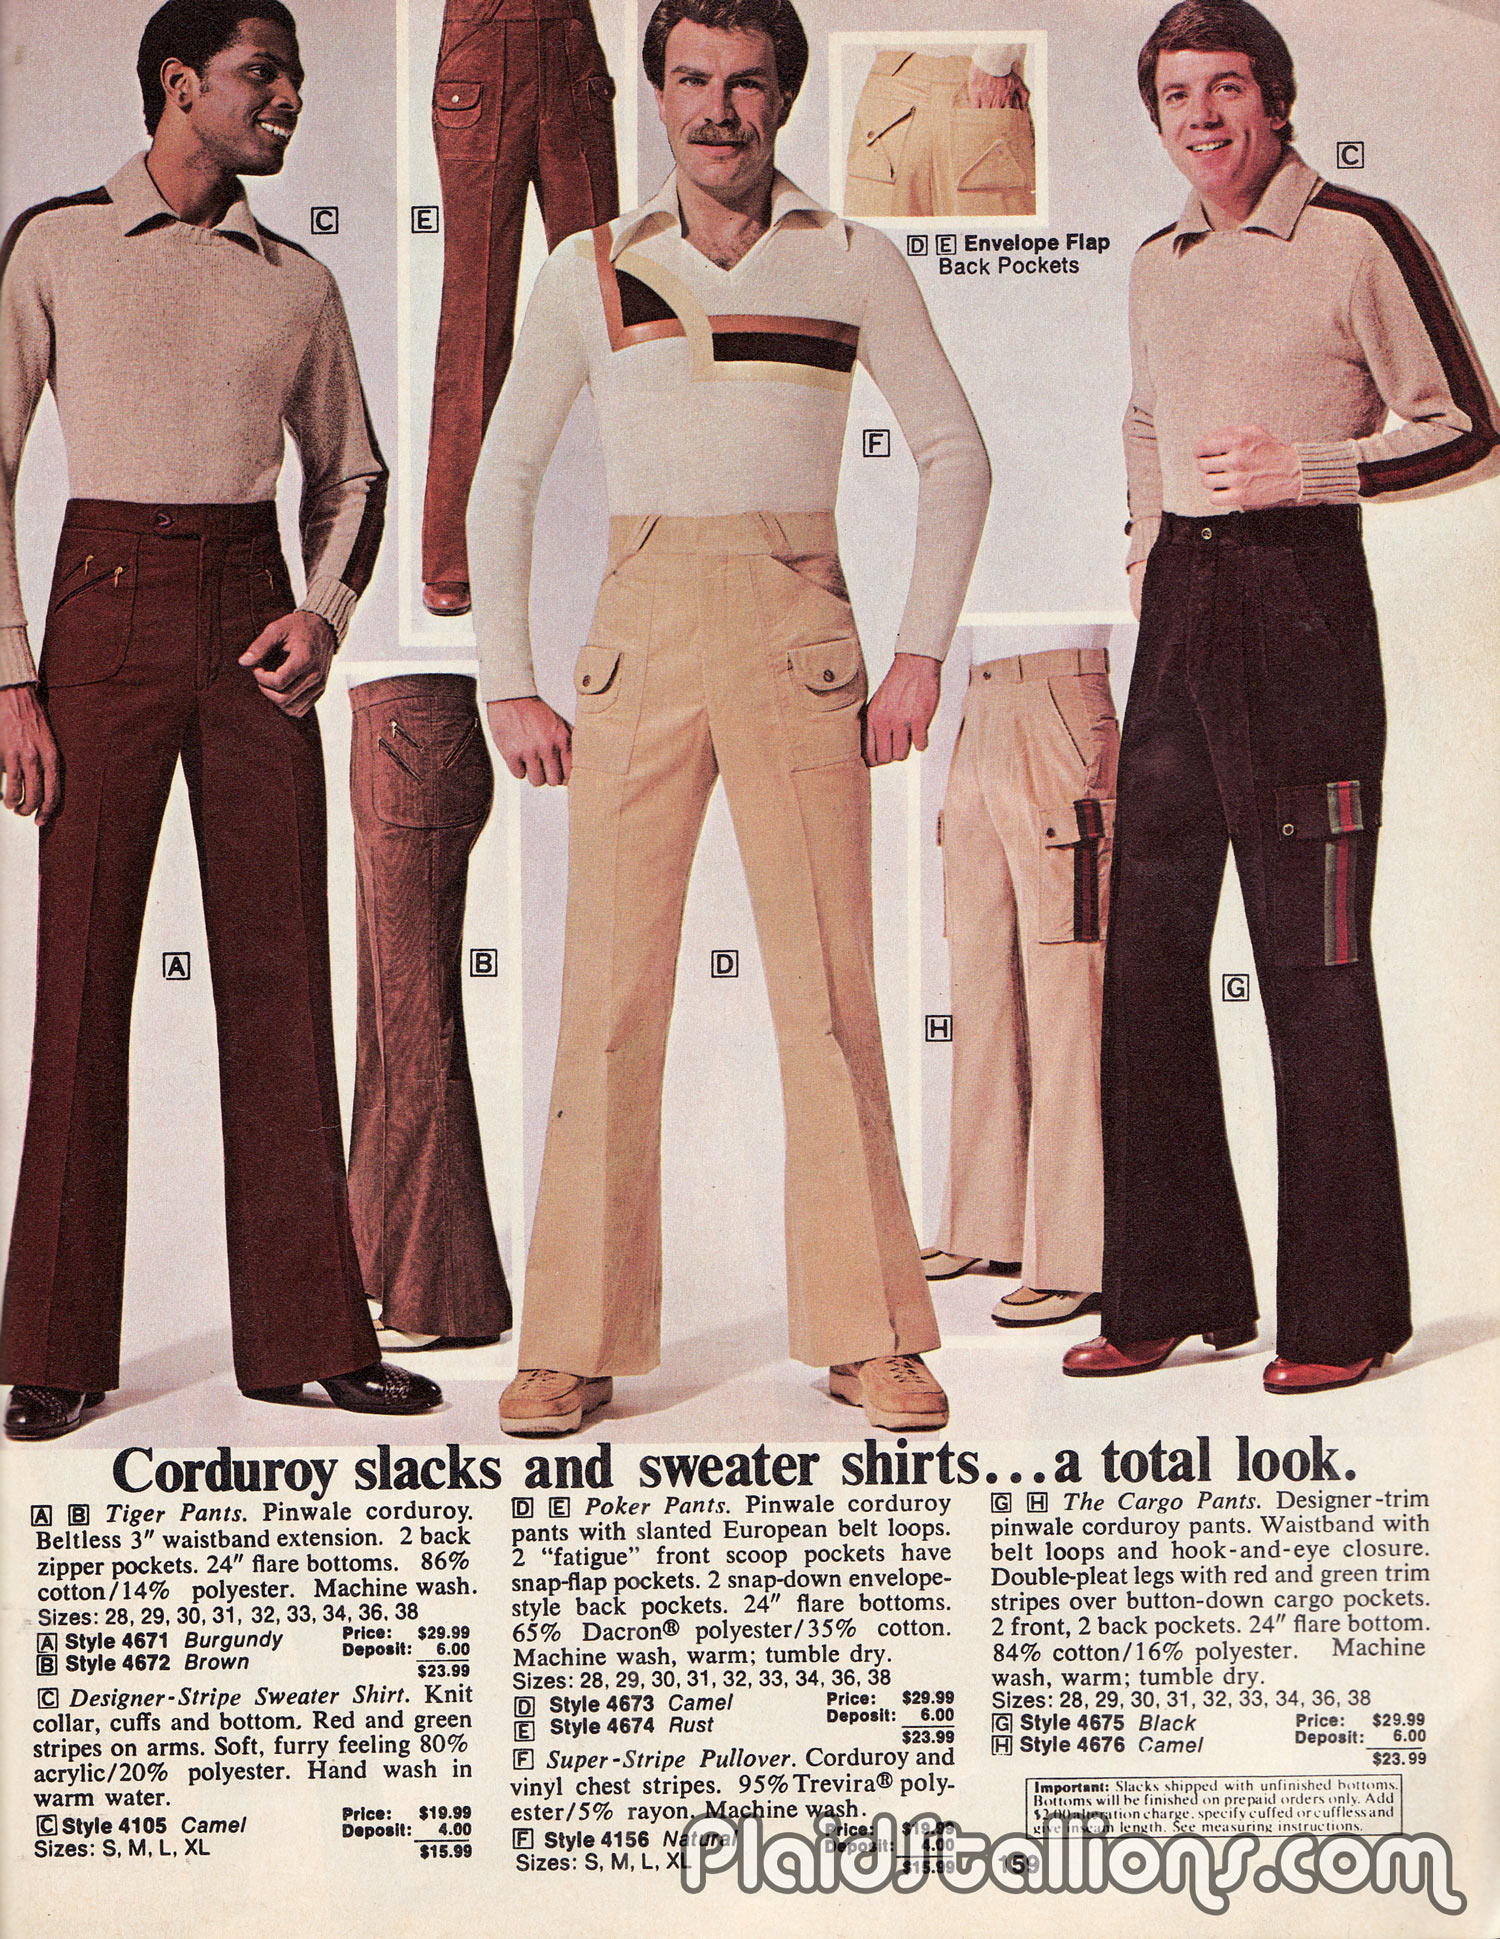 Plaid Stallions : Rambling and Reflections on '70s pop culture: Corduroy: A  Total Look